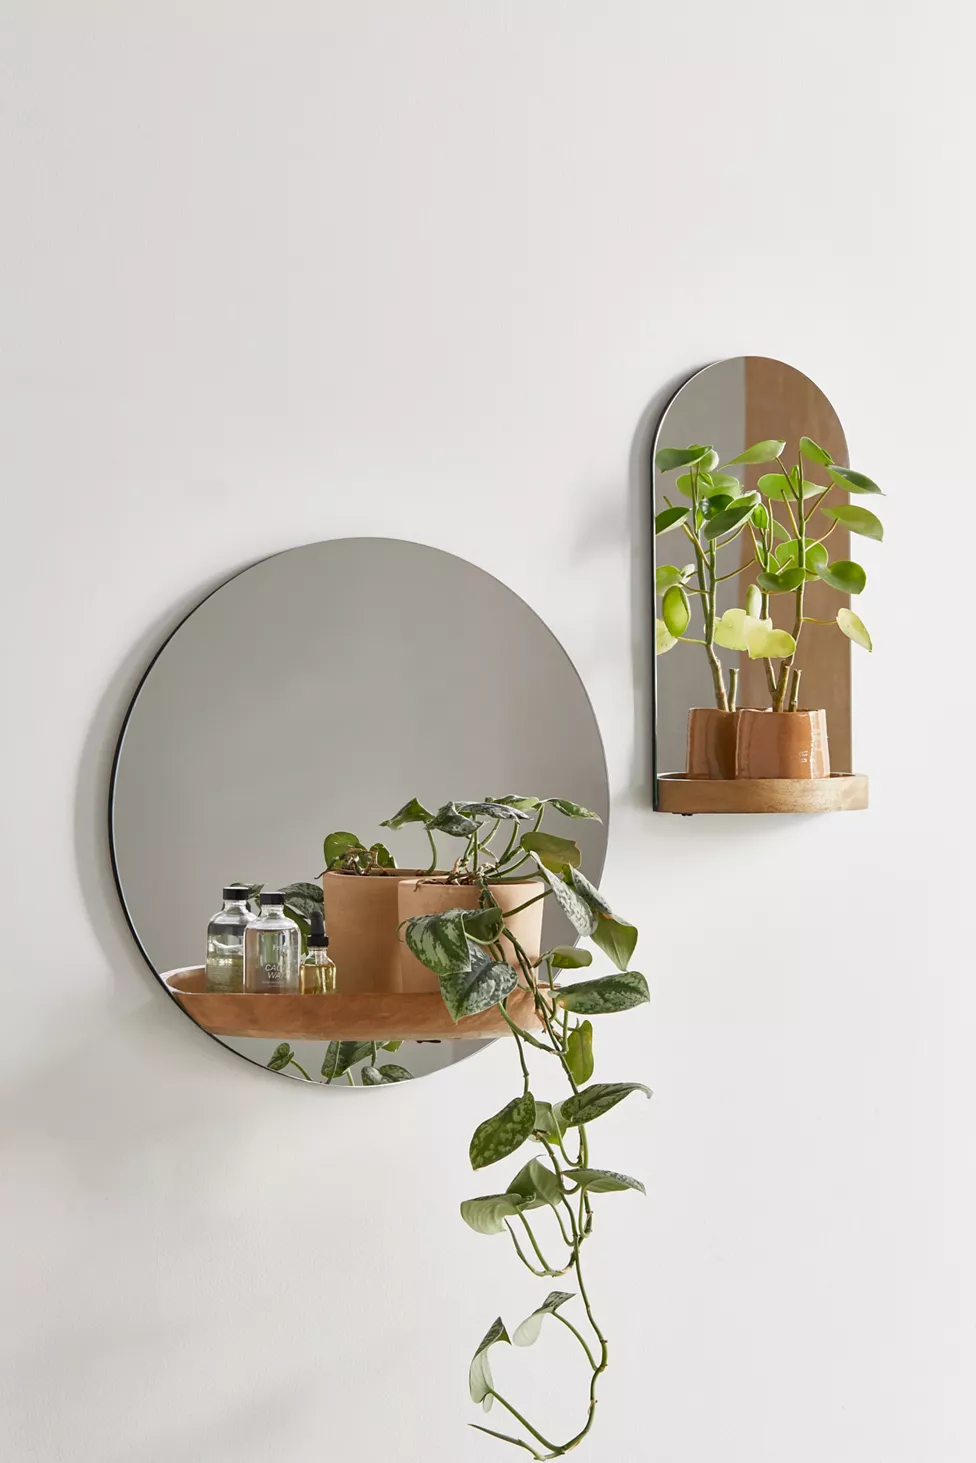 Decorative wall mirror: The shine of your house